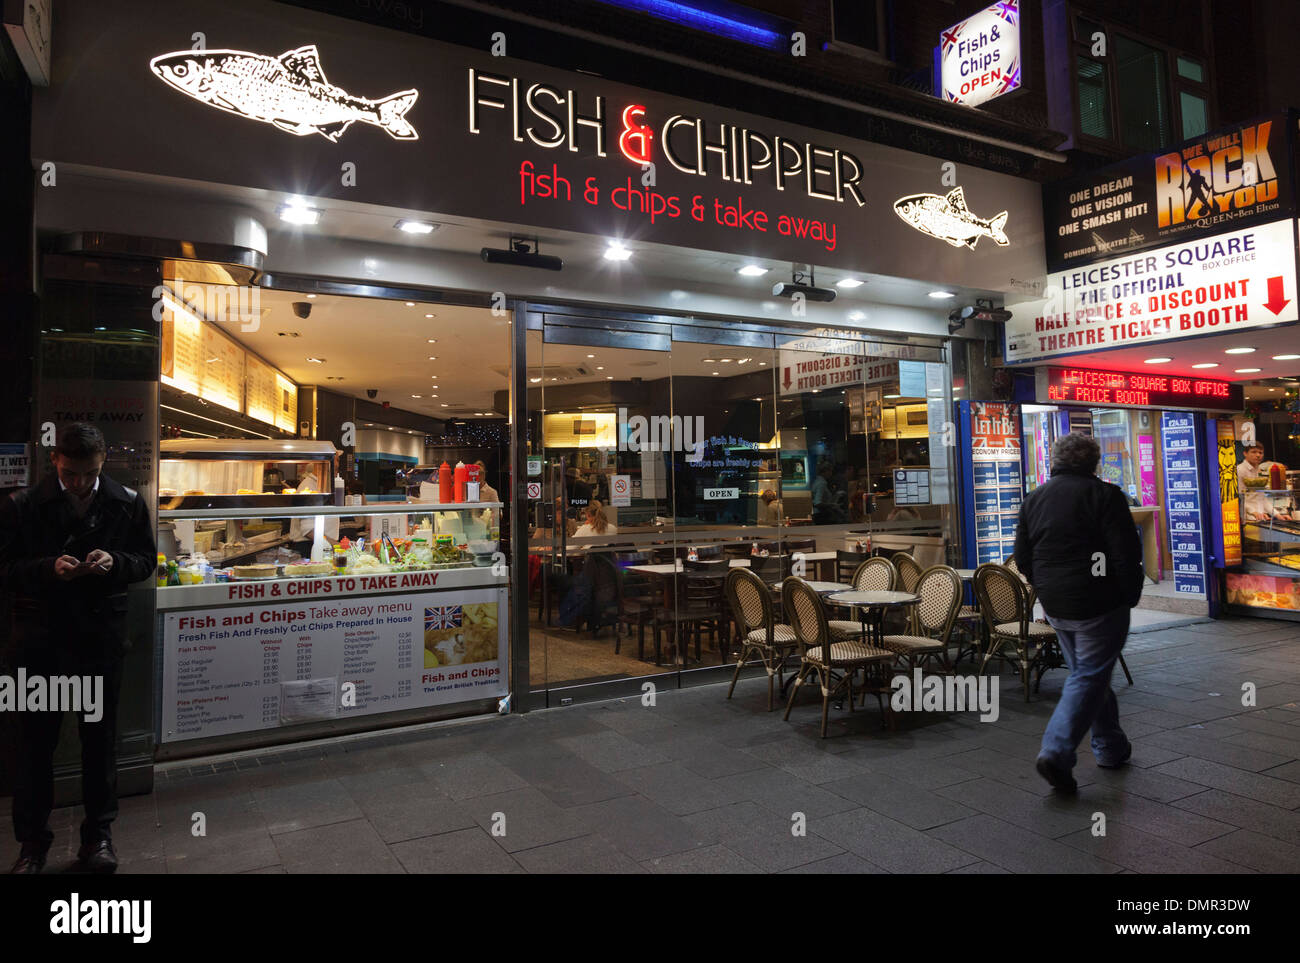 Fish & Chipper, chip shop with take-away service in Leicester Square, London, England, United Kingdom, UK Stock Photo